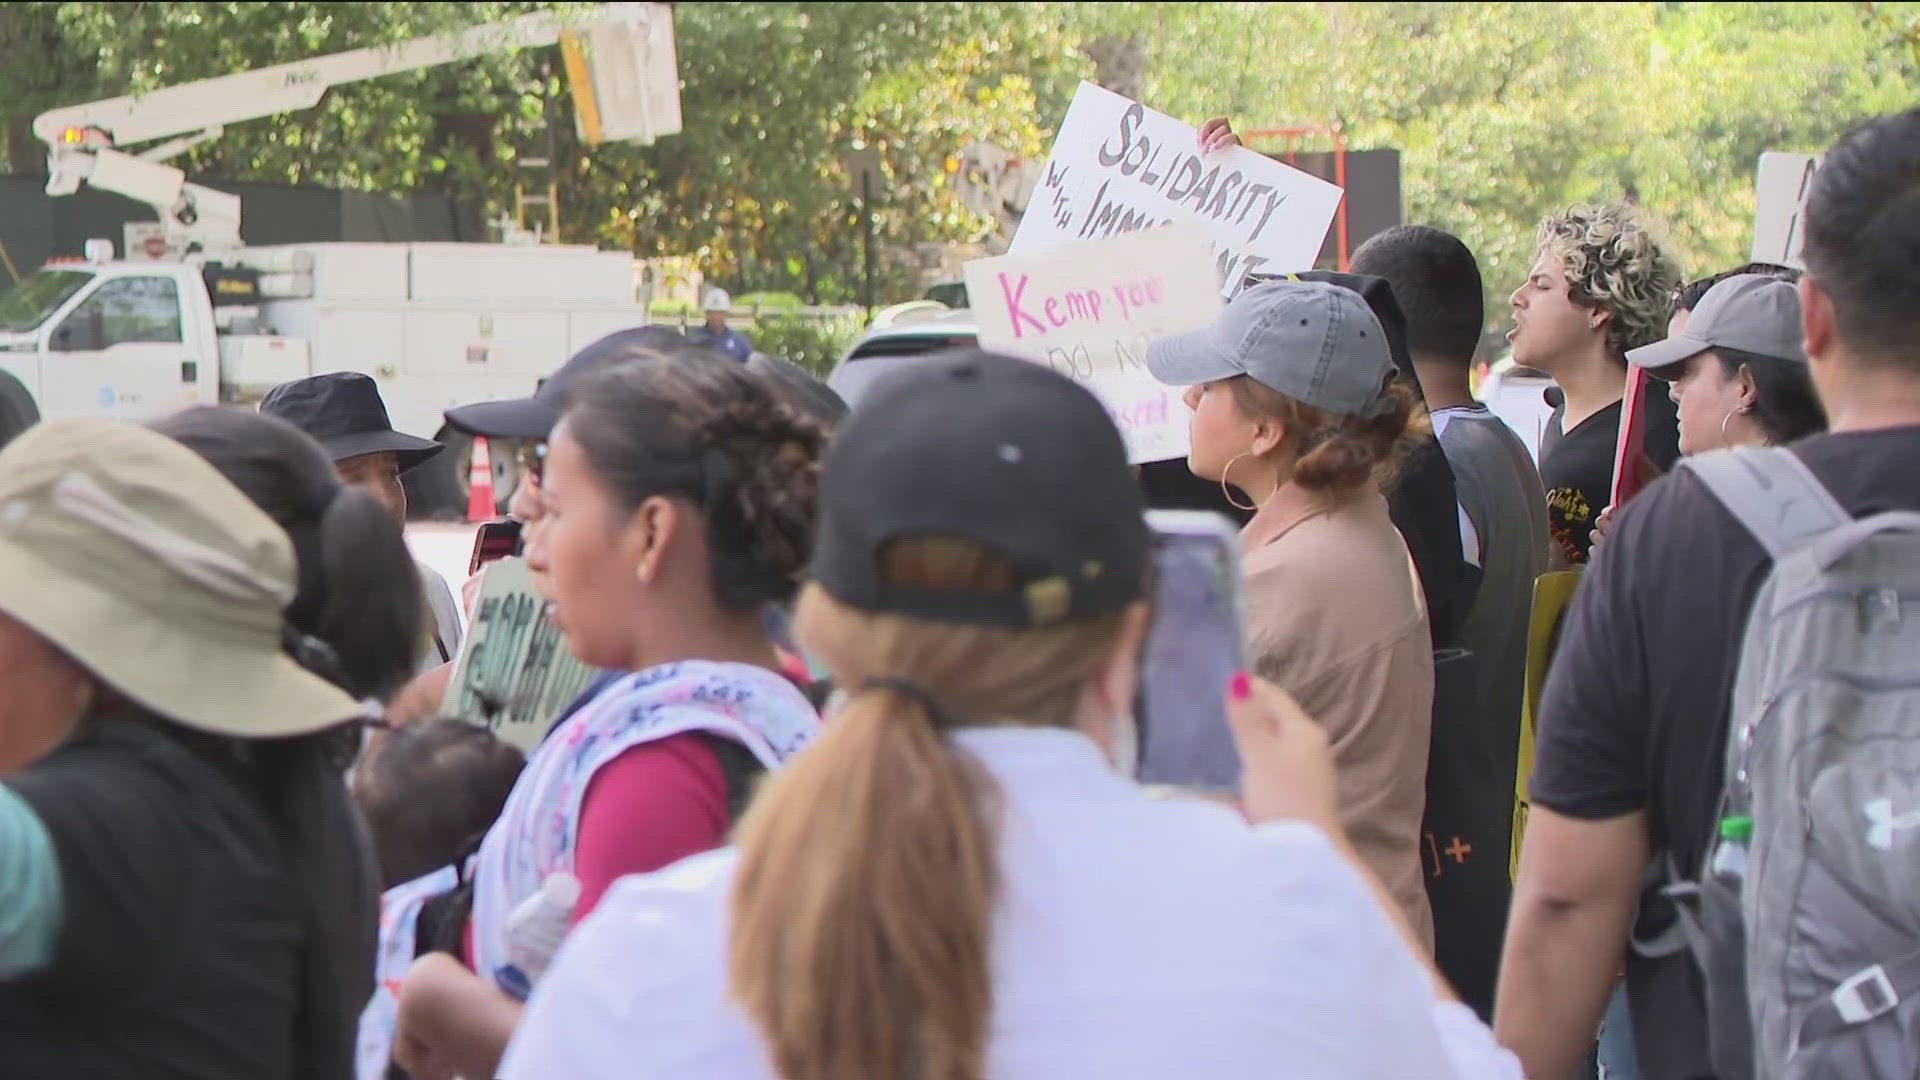 11Alive SkyTracker flew over as immigration advocates marched to the Governor's Mansion in protest of HB 1105.